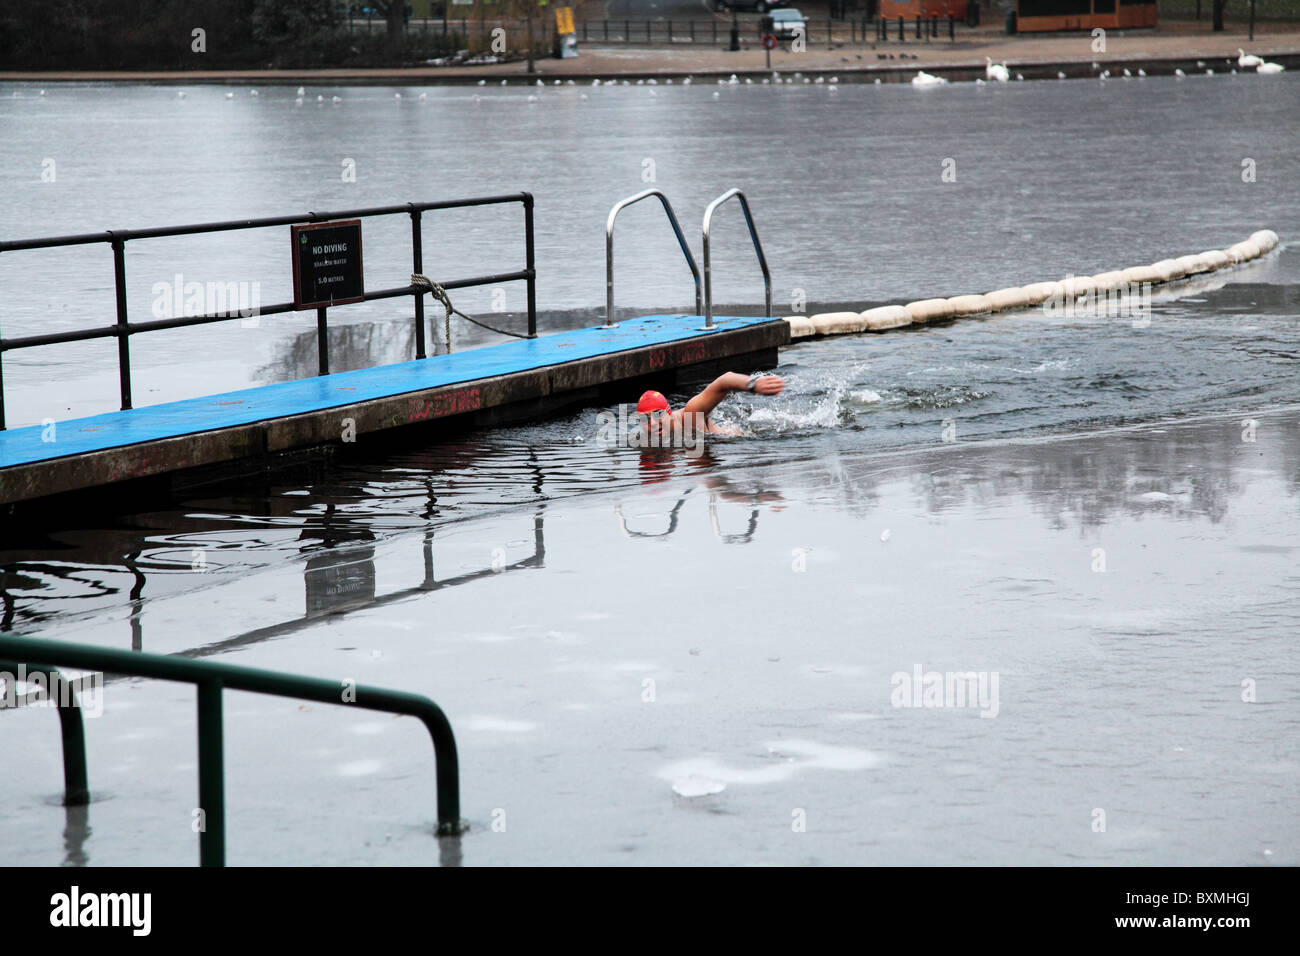 A lone swimmer. On Christmas Day 2010 at the Serpentine Swimming Club in Hyde Park, London. Stock Photo